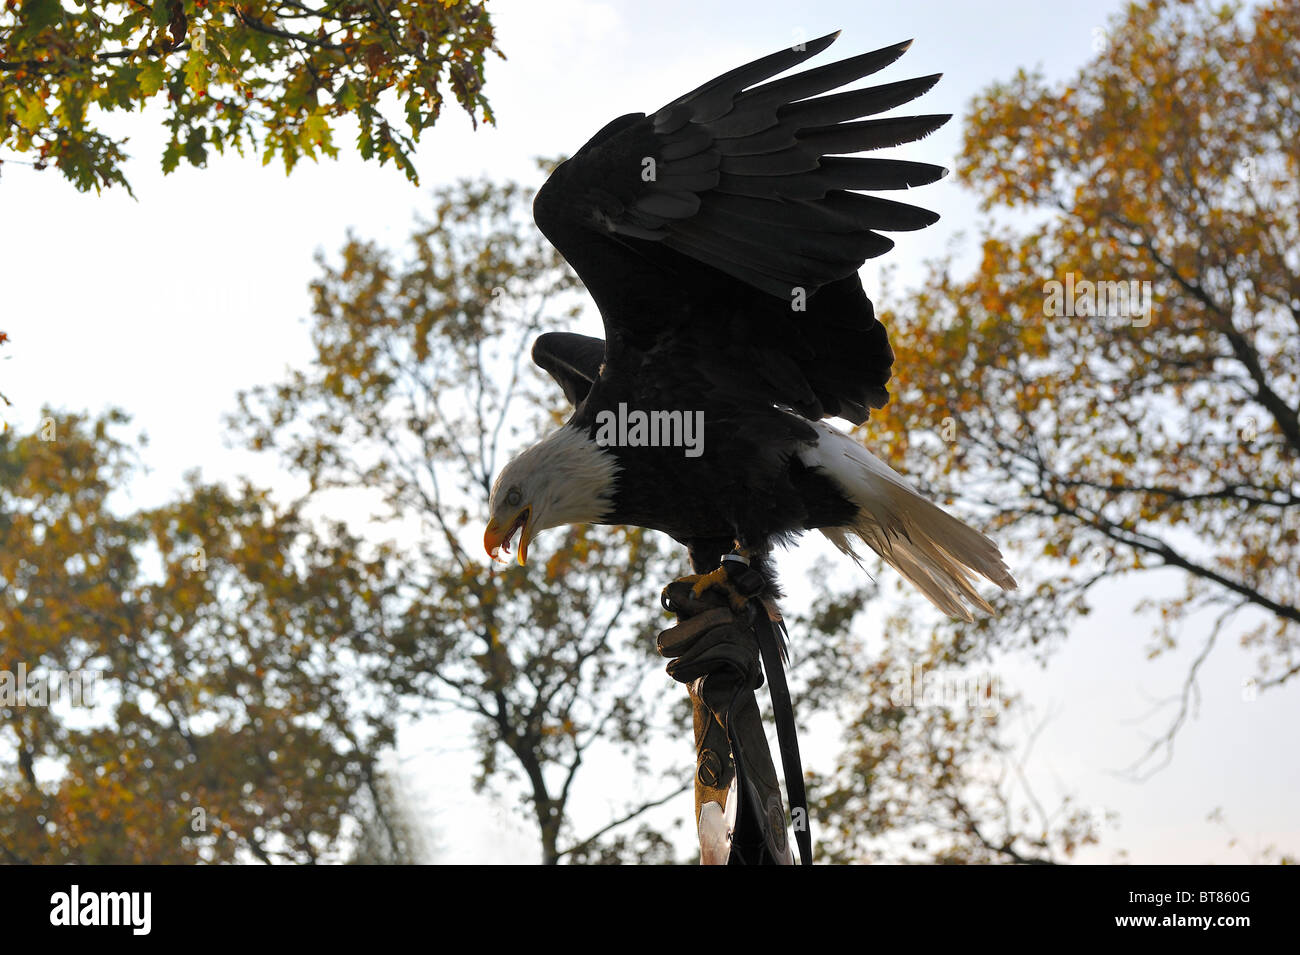 Falconer carrying a bald eagle on his arm. Stock Photo